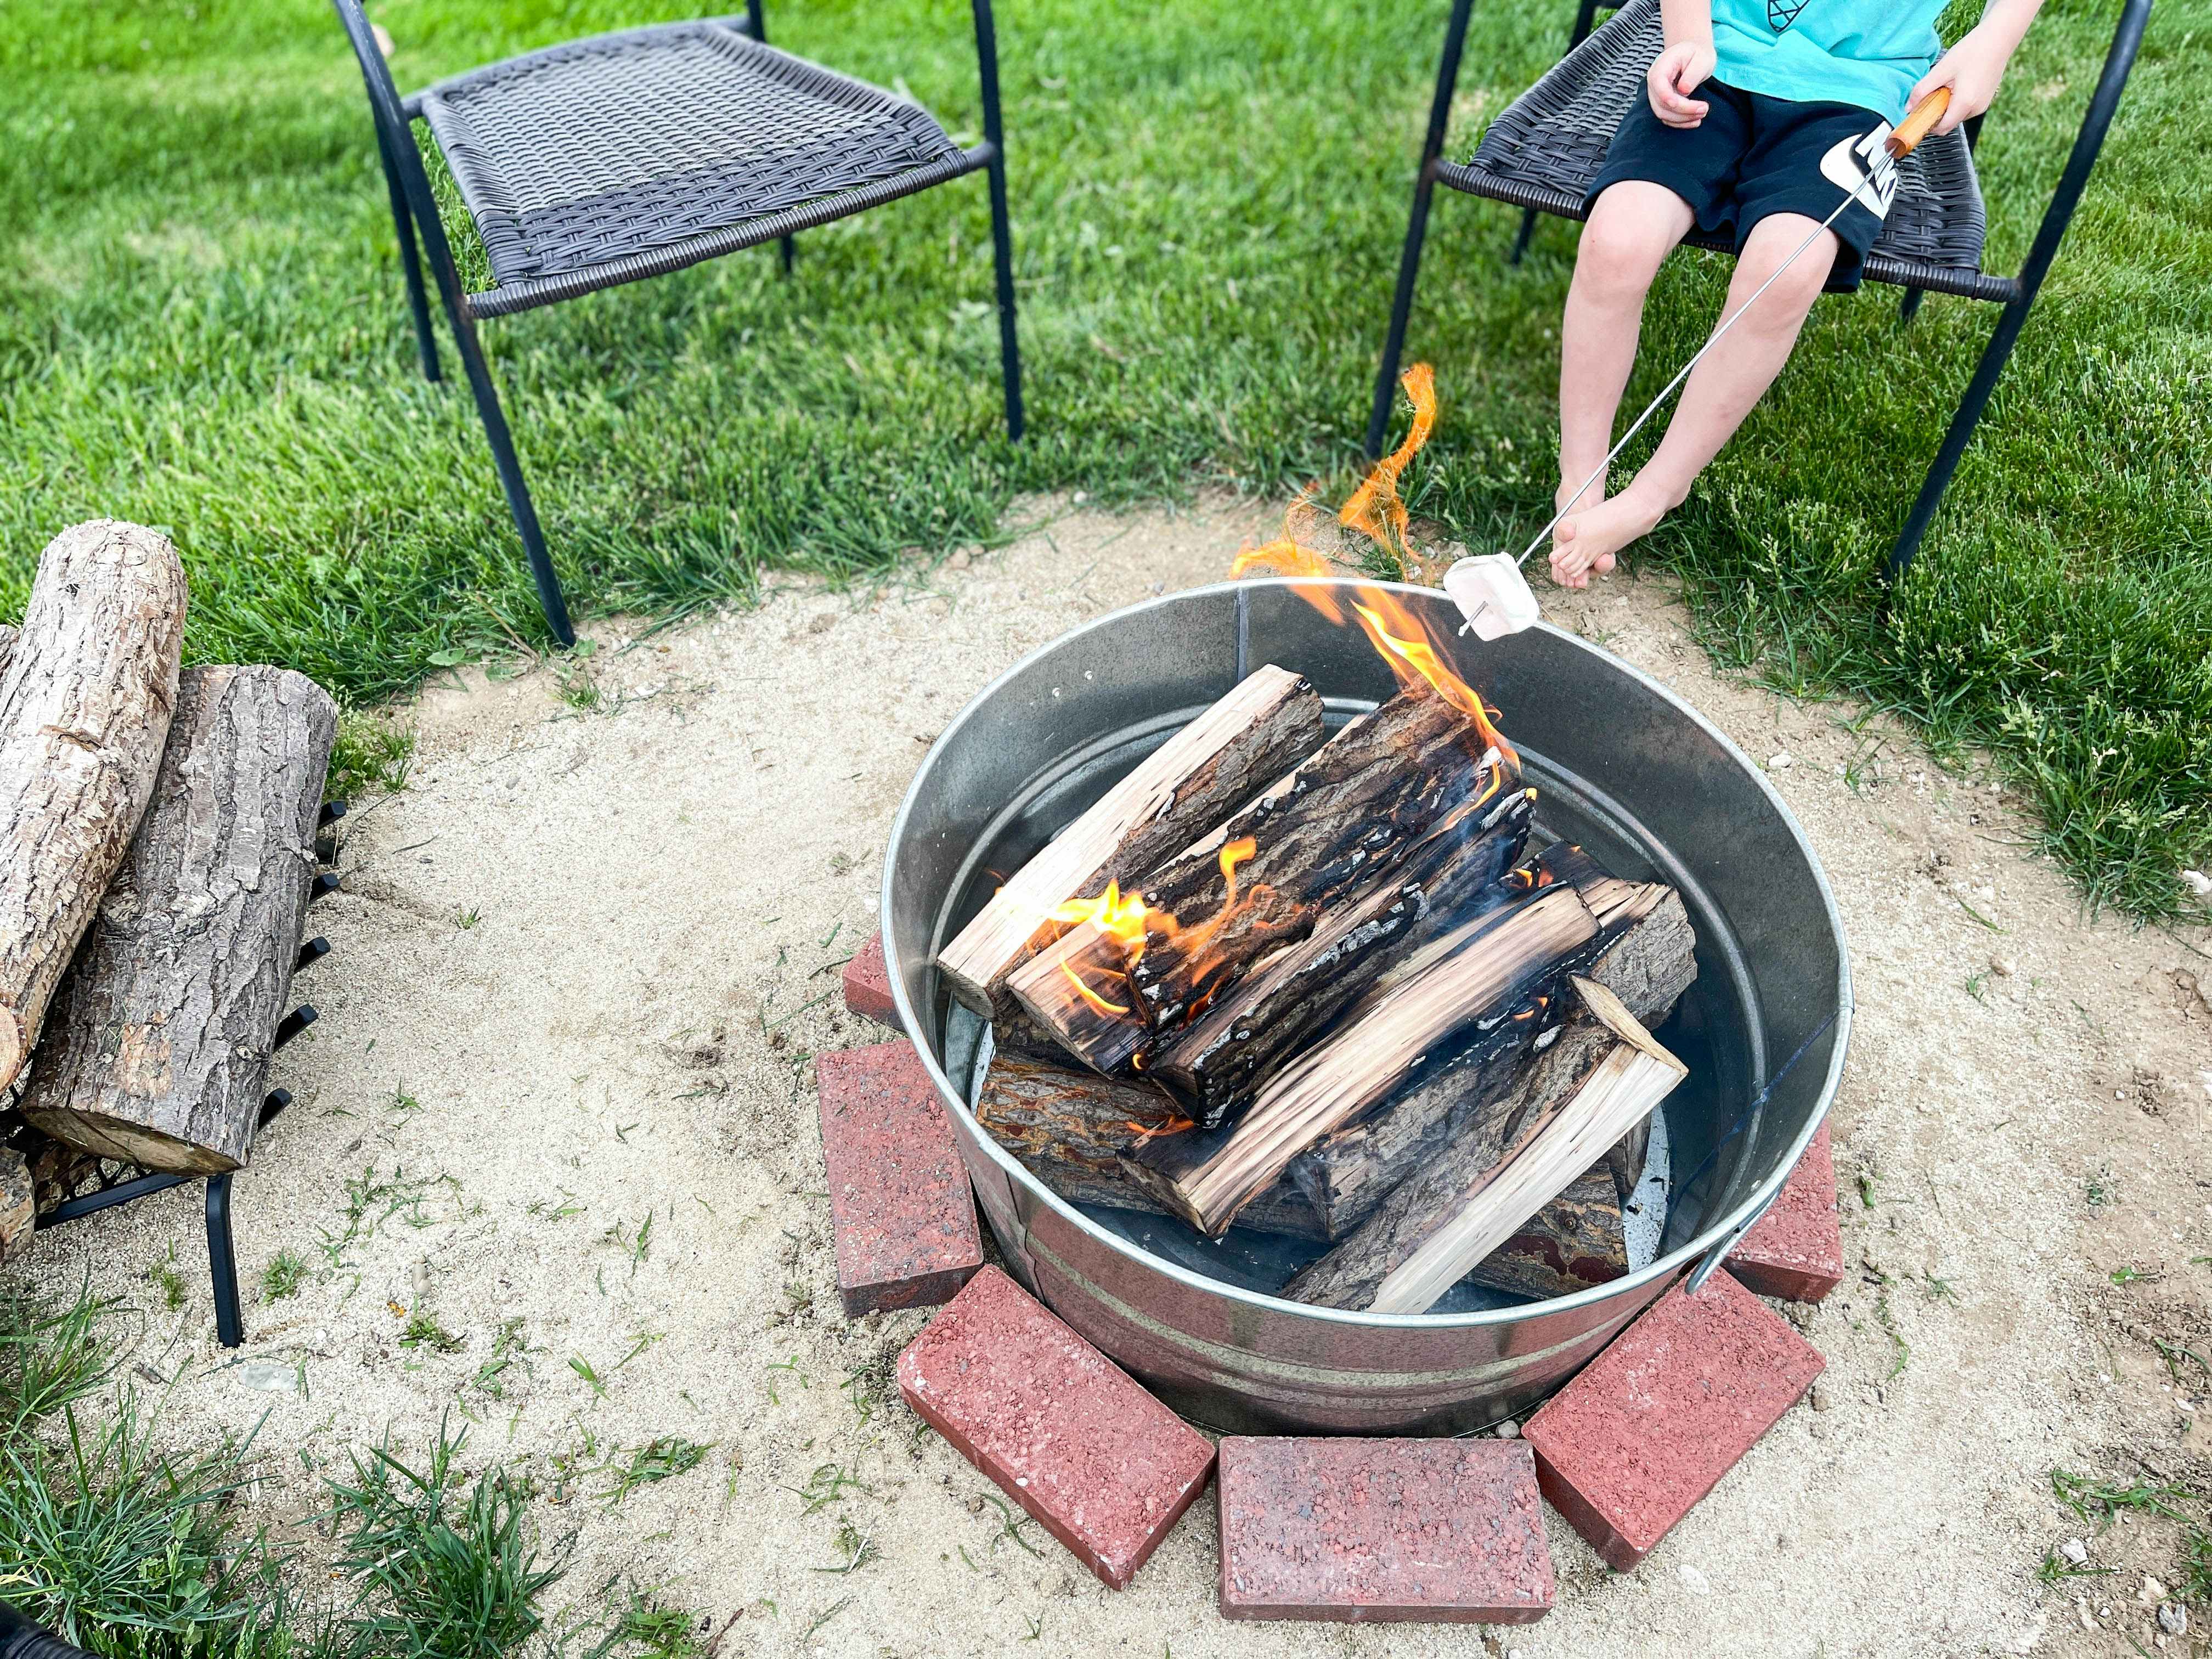 diy firepit in backyard from a galvanized pale with kids cooking marshmellows